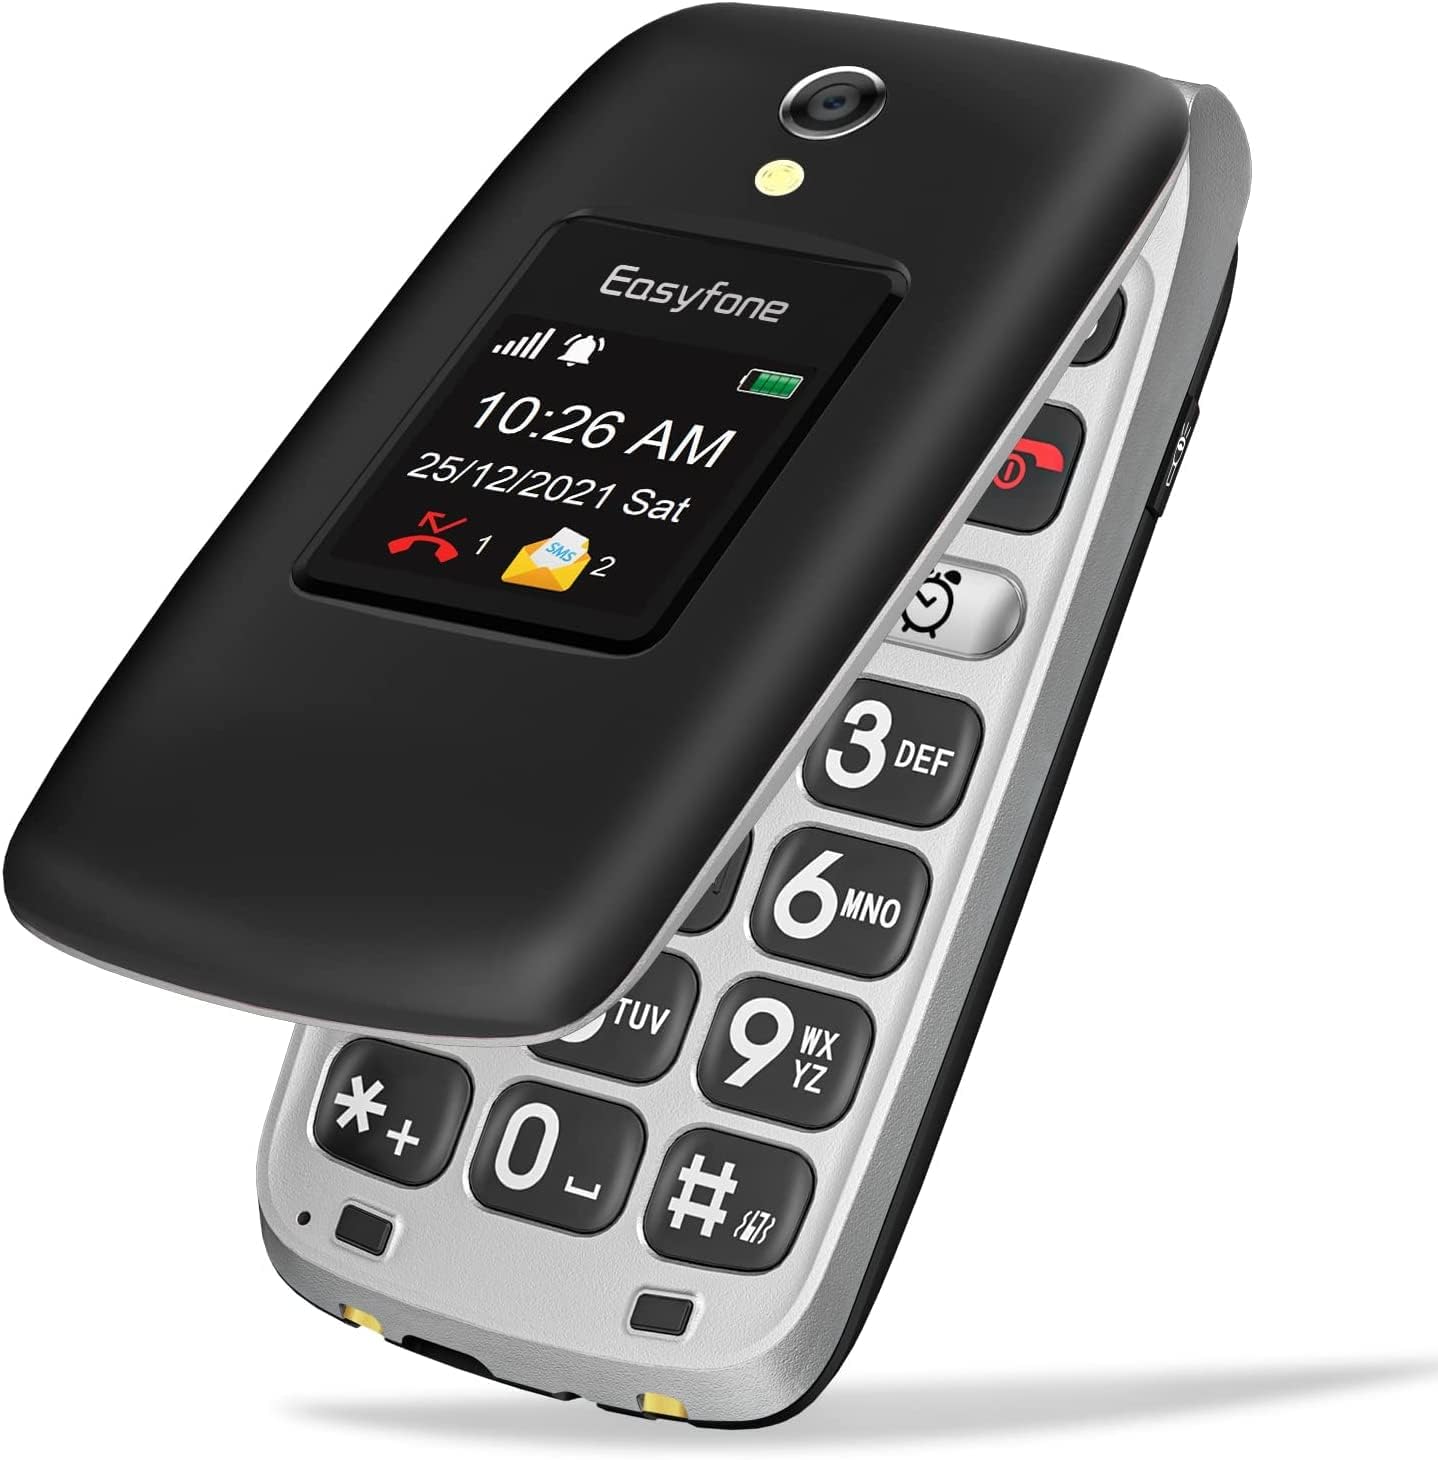 Easyfone Prime-A1 Pro 4G Easy-to-Use Flip Cell Phone, 2.4'' HD Display, Big Buttons, Clear Sound, Large Fonts, SOS Button, SIM Card Included, Dumbphone with 1500mAh Battery and a Charging Dock (Black)